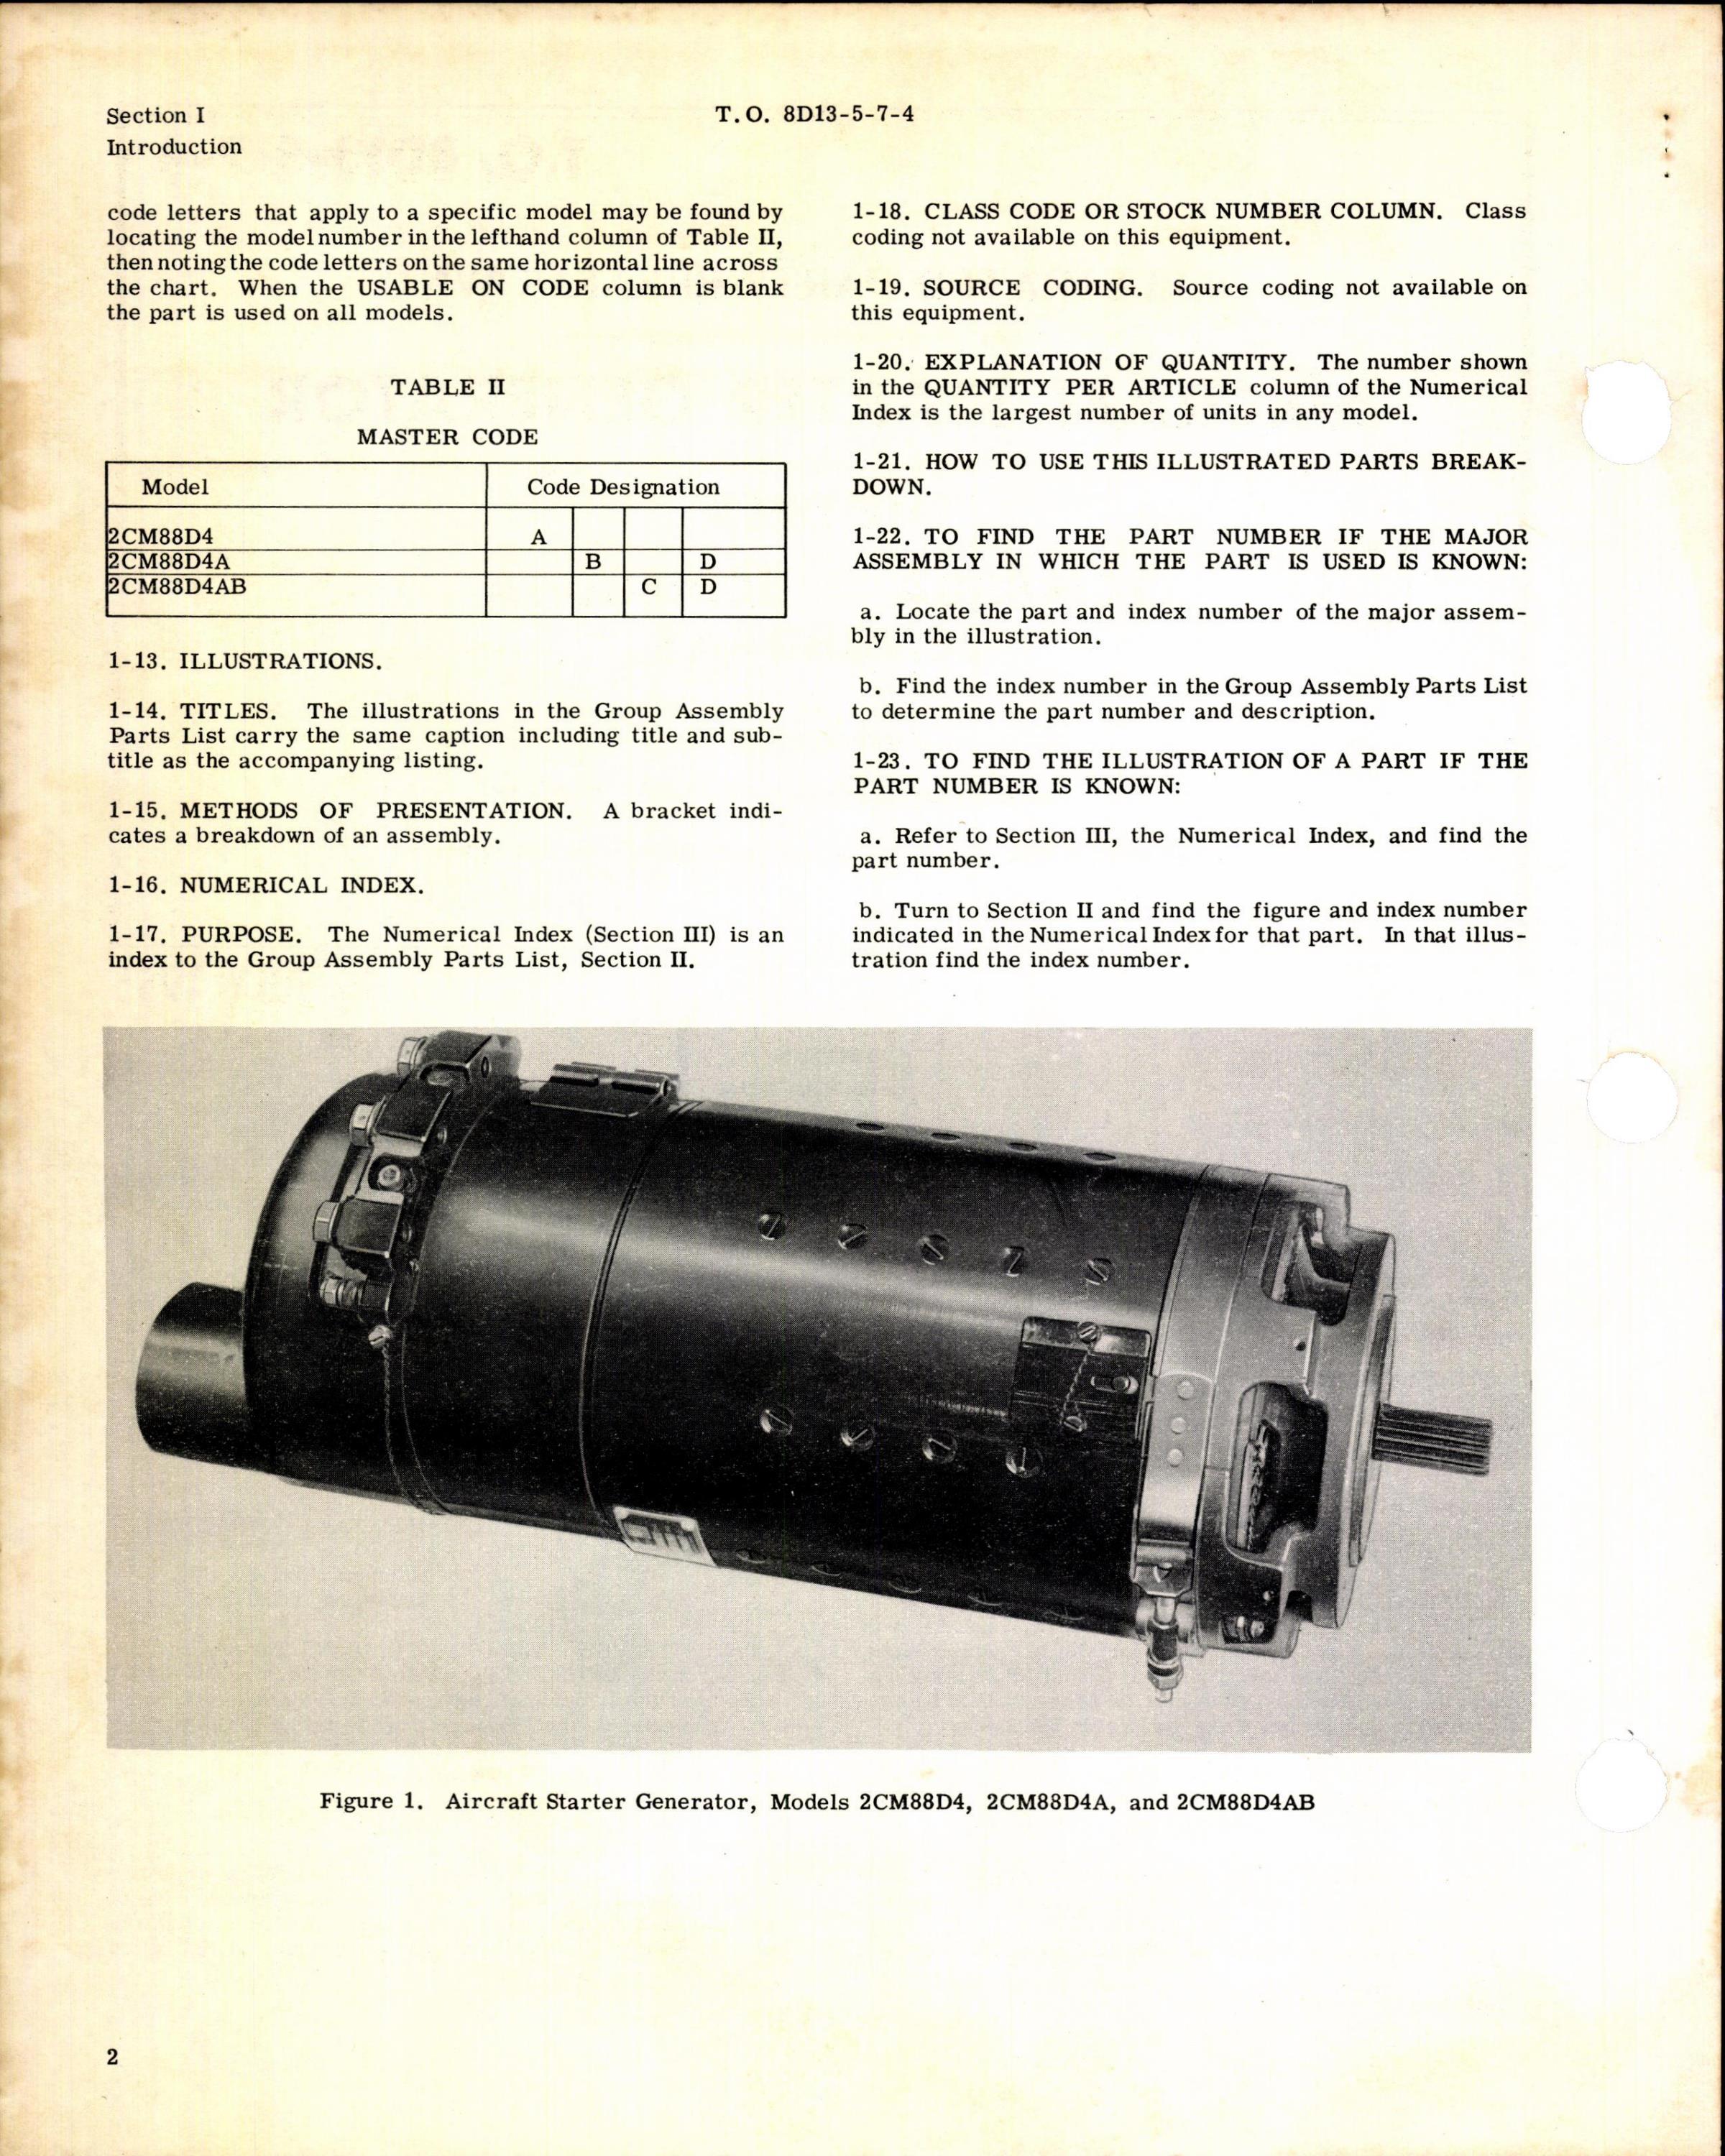 Sample page 2 from AirCorps Library document: Illustrated Parts Breakdown for Aircraft Starter Generator